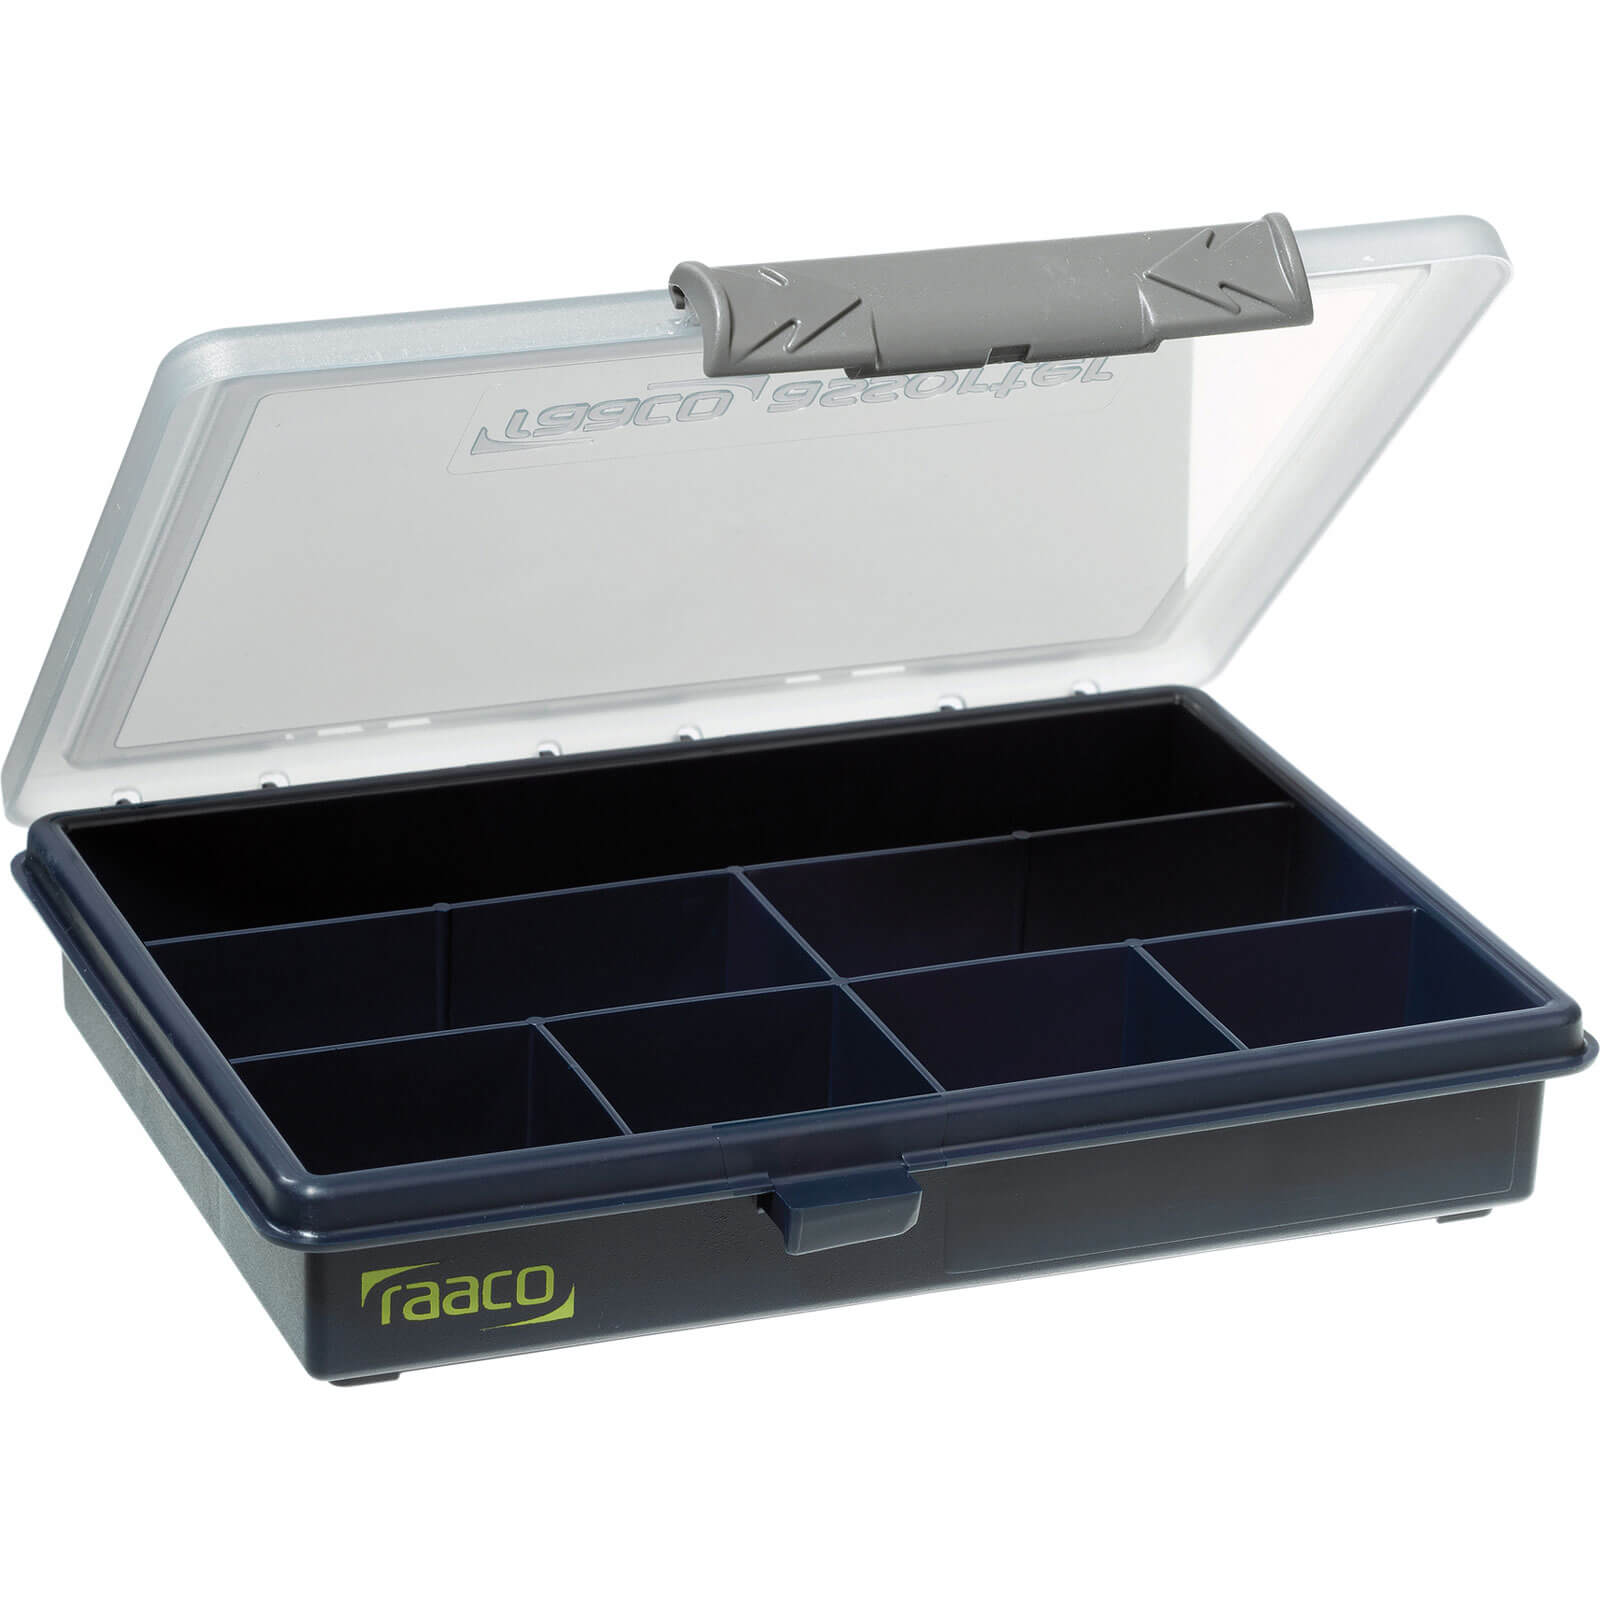 Image of Raaco 7 Compartment A6 Organiser Case